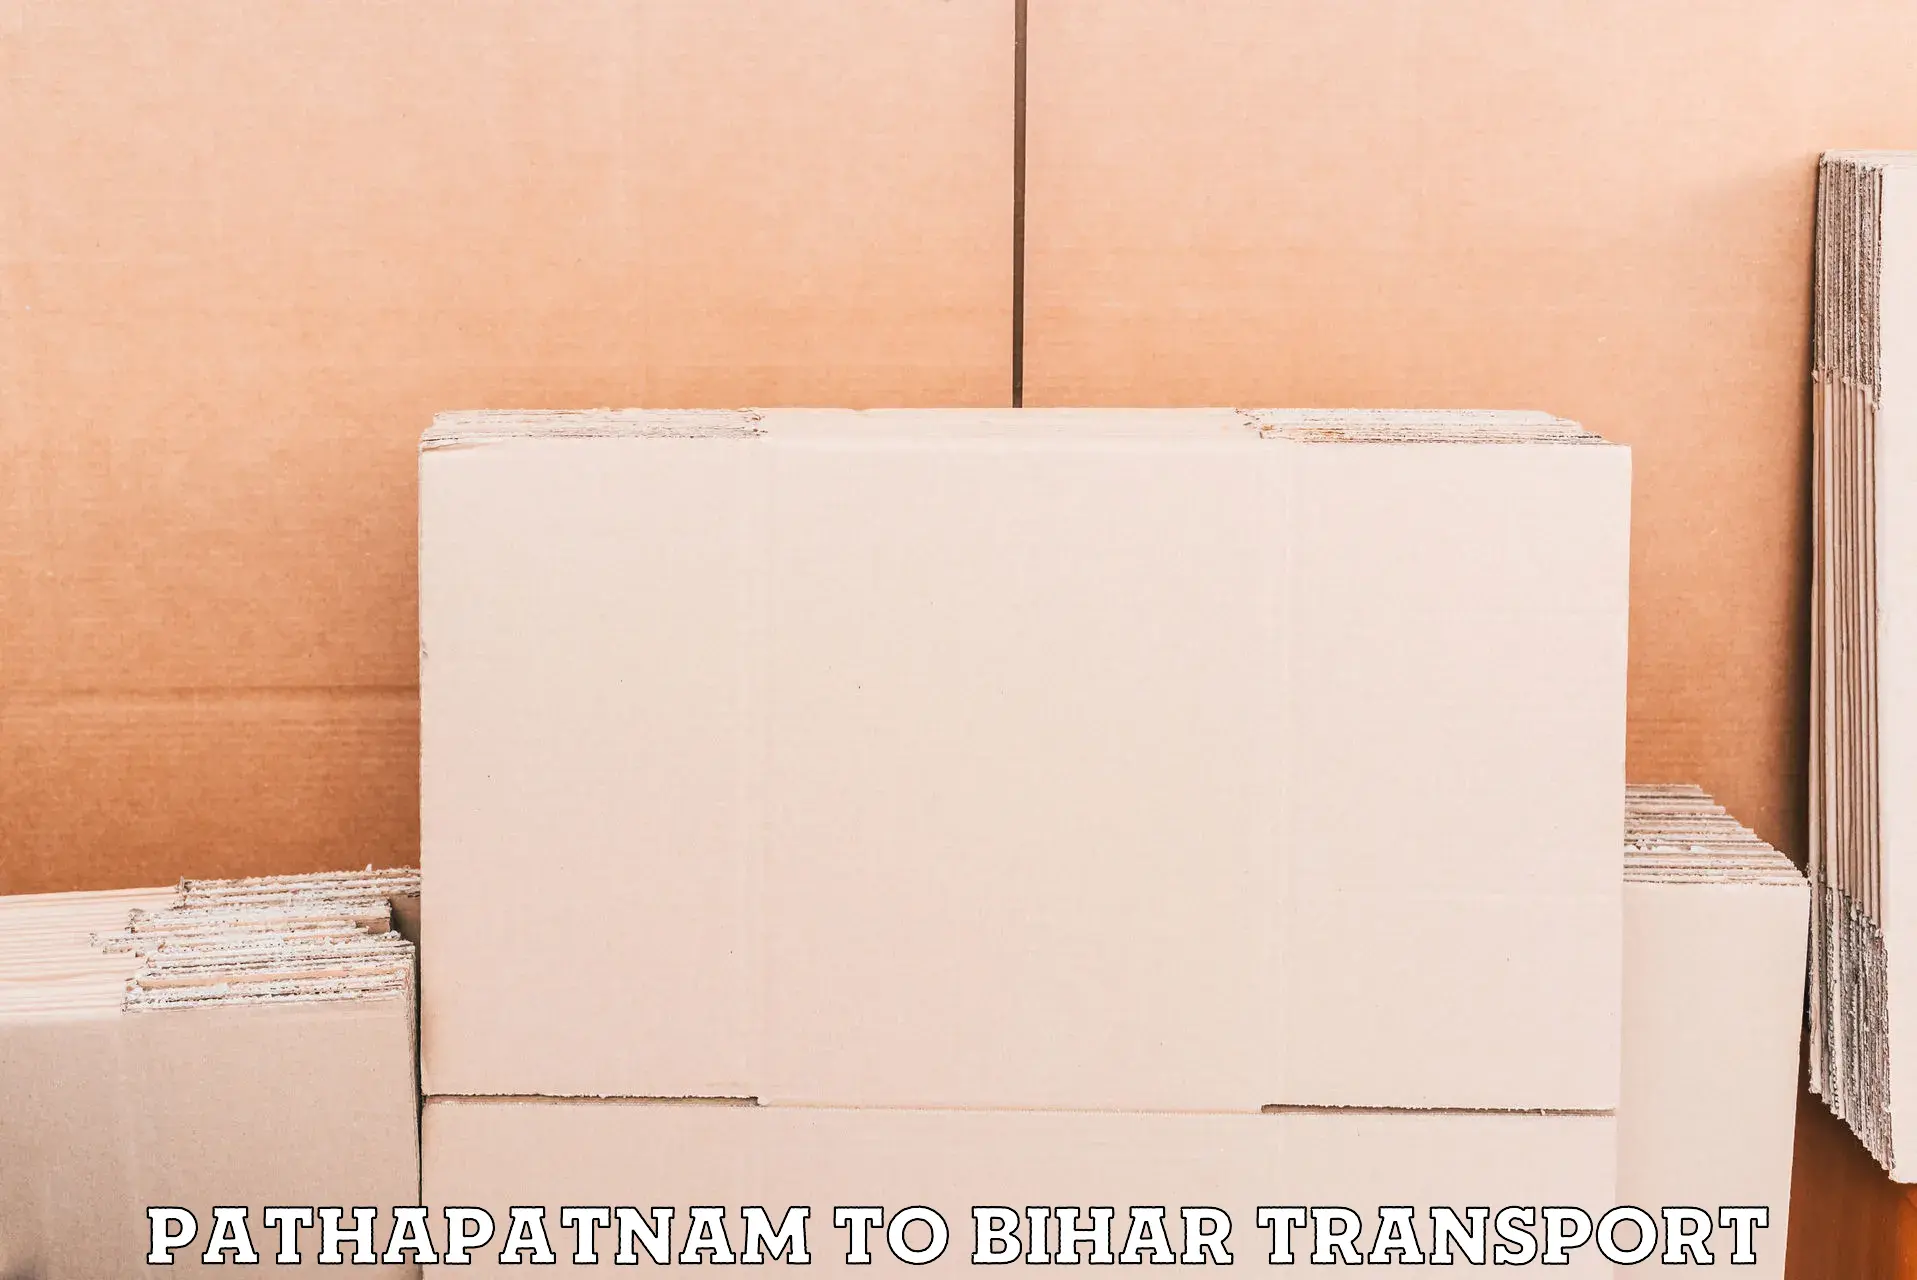 Container transport service Pathapatnam to Kamtaul